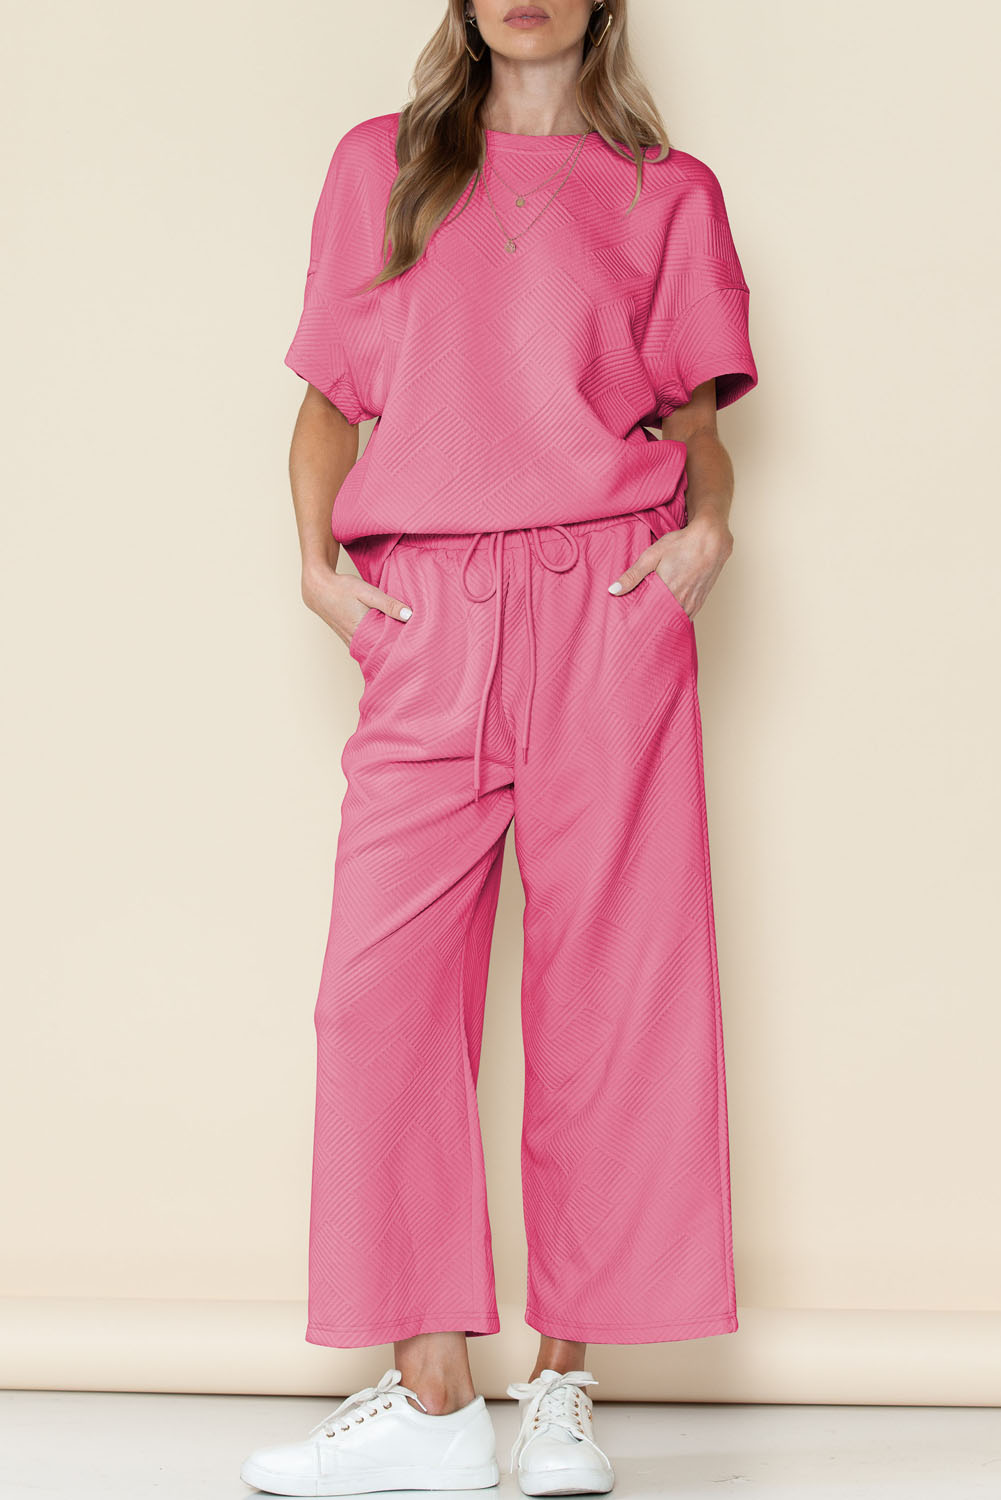 Shewin Wholesale Southern Strawberry Pink Textured Loose Fit T SHIRT & Drawstring Pants Set